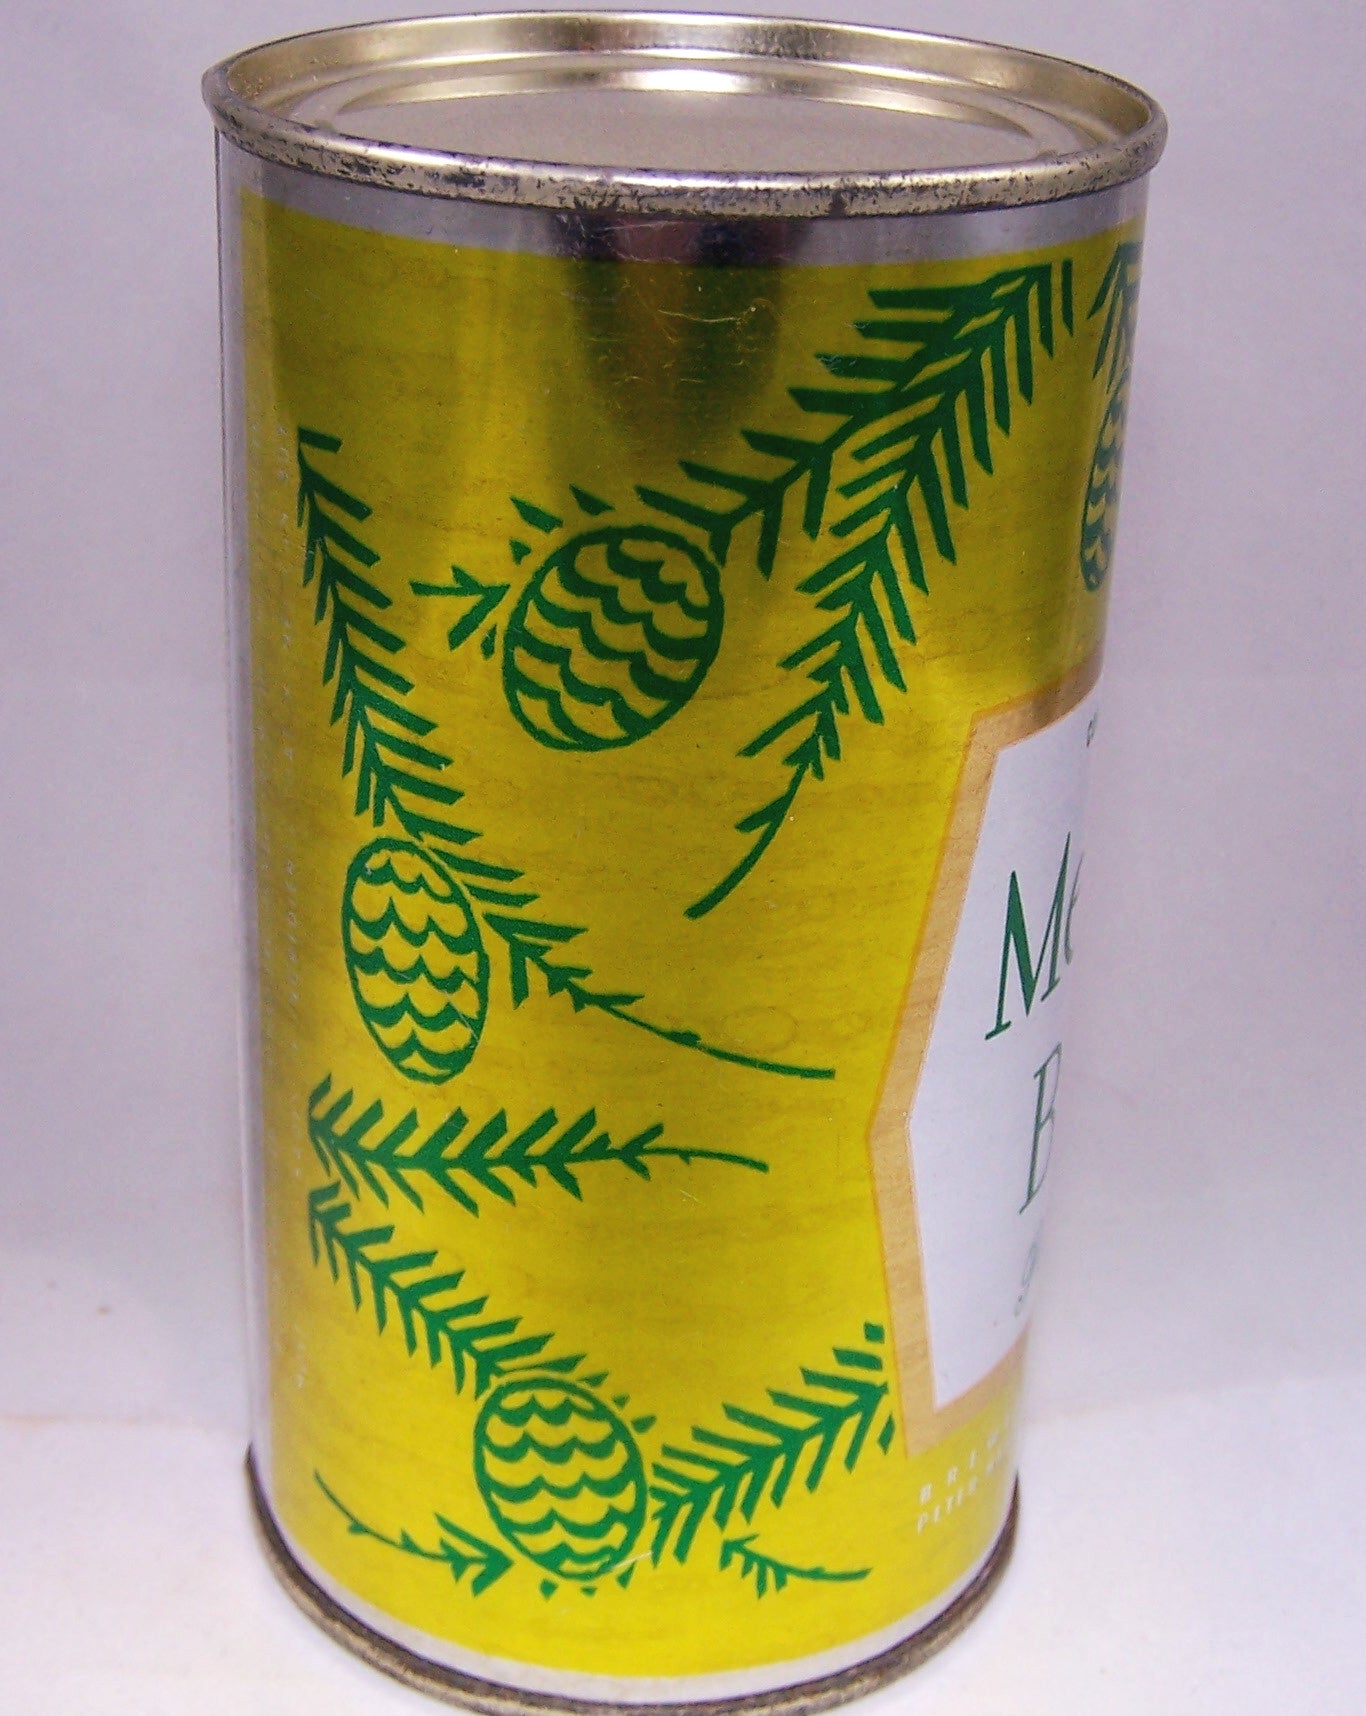 Meister Brau Sno-Pack can (Pine Boughs) USBC 96-9, 1/1+ Sold on 10/03/15